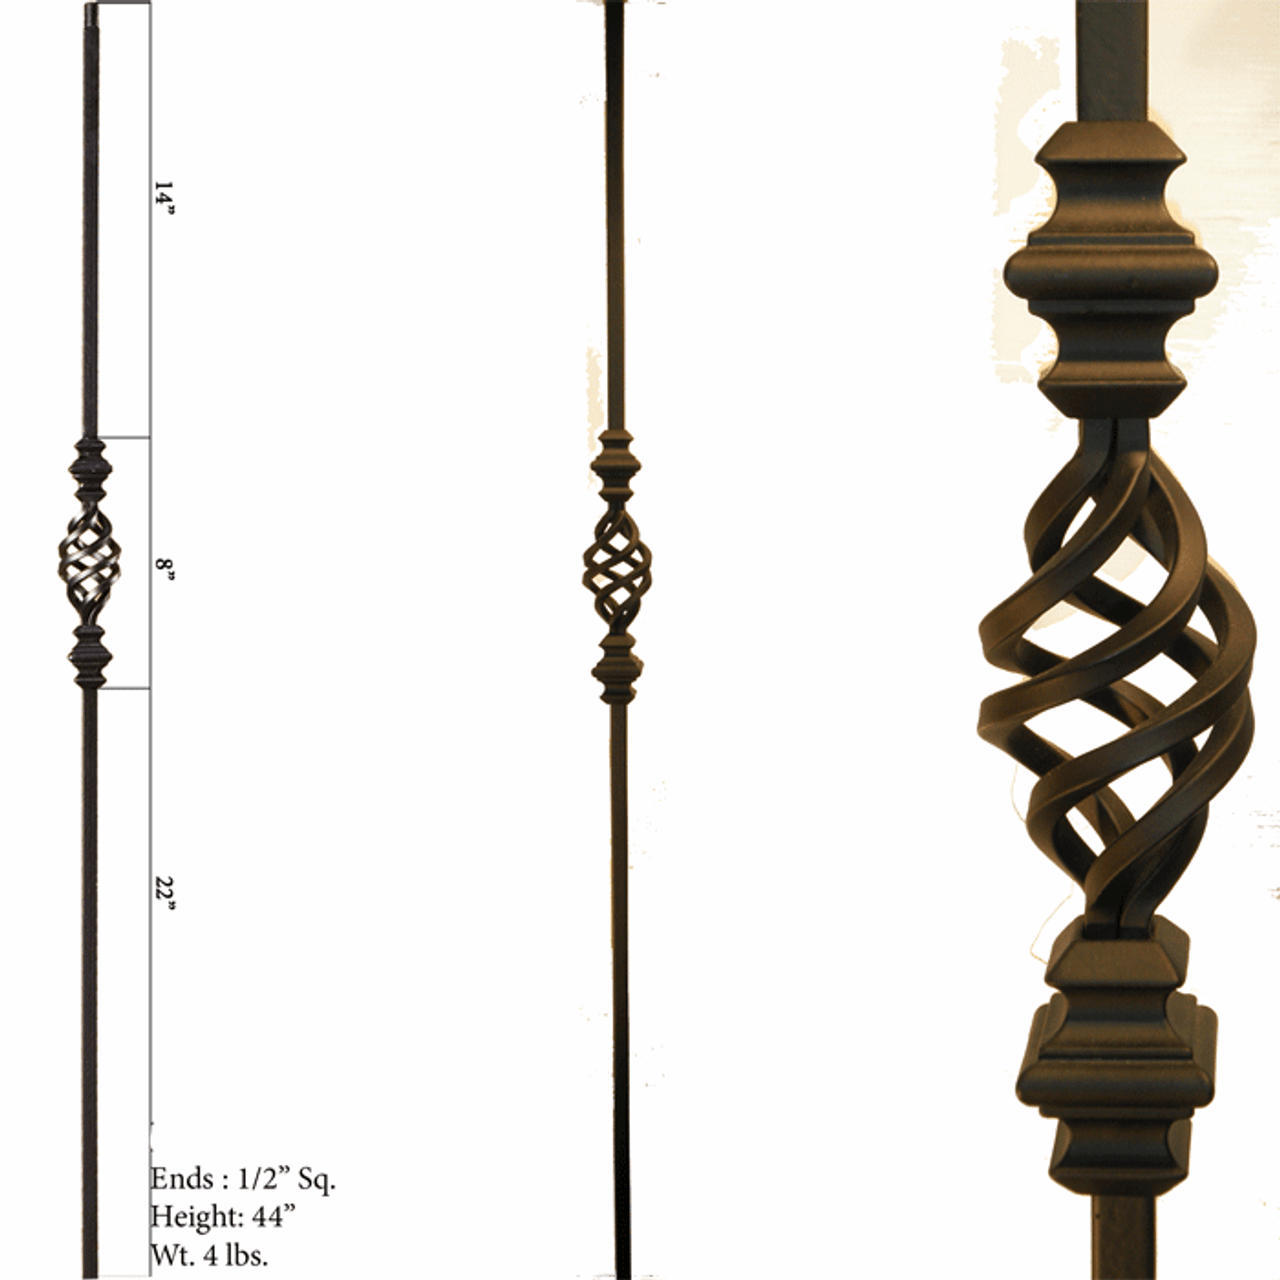 Double Knuckle Basket 1/2" Iron Baluster